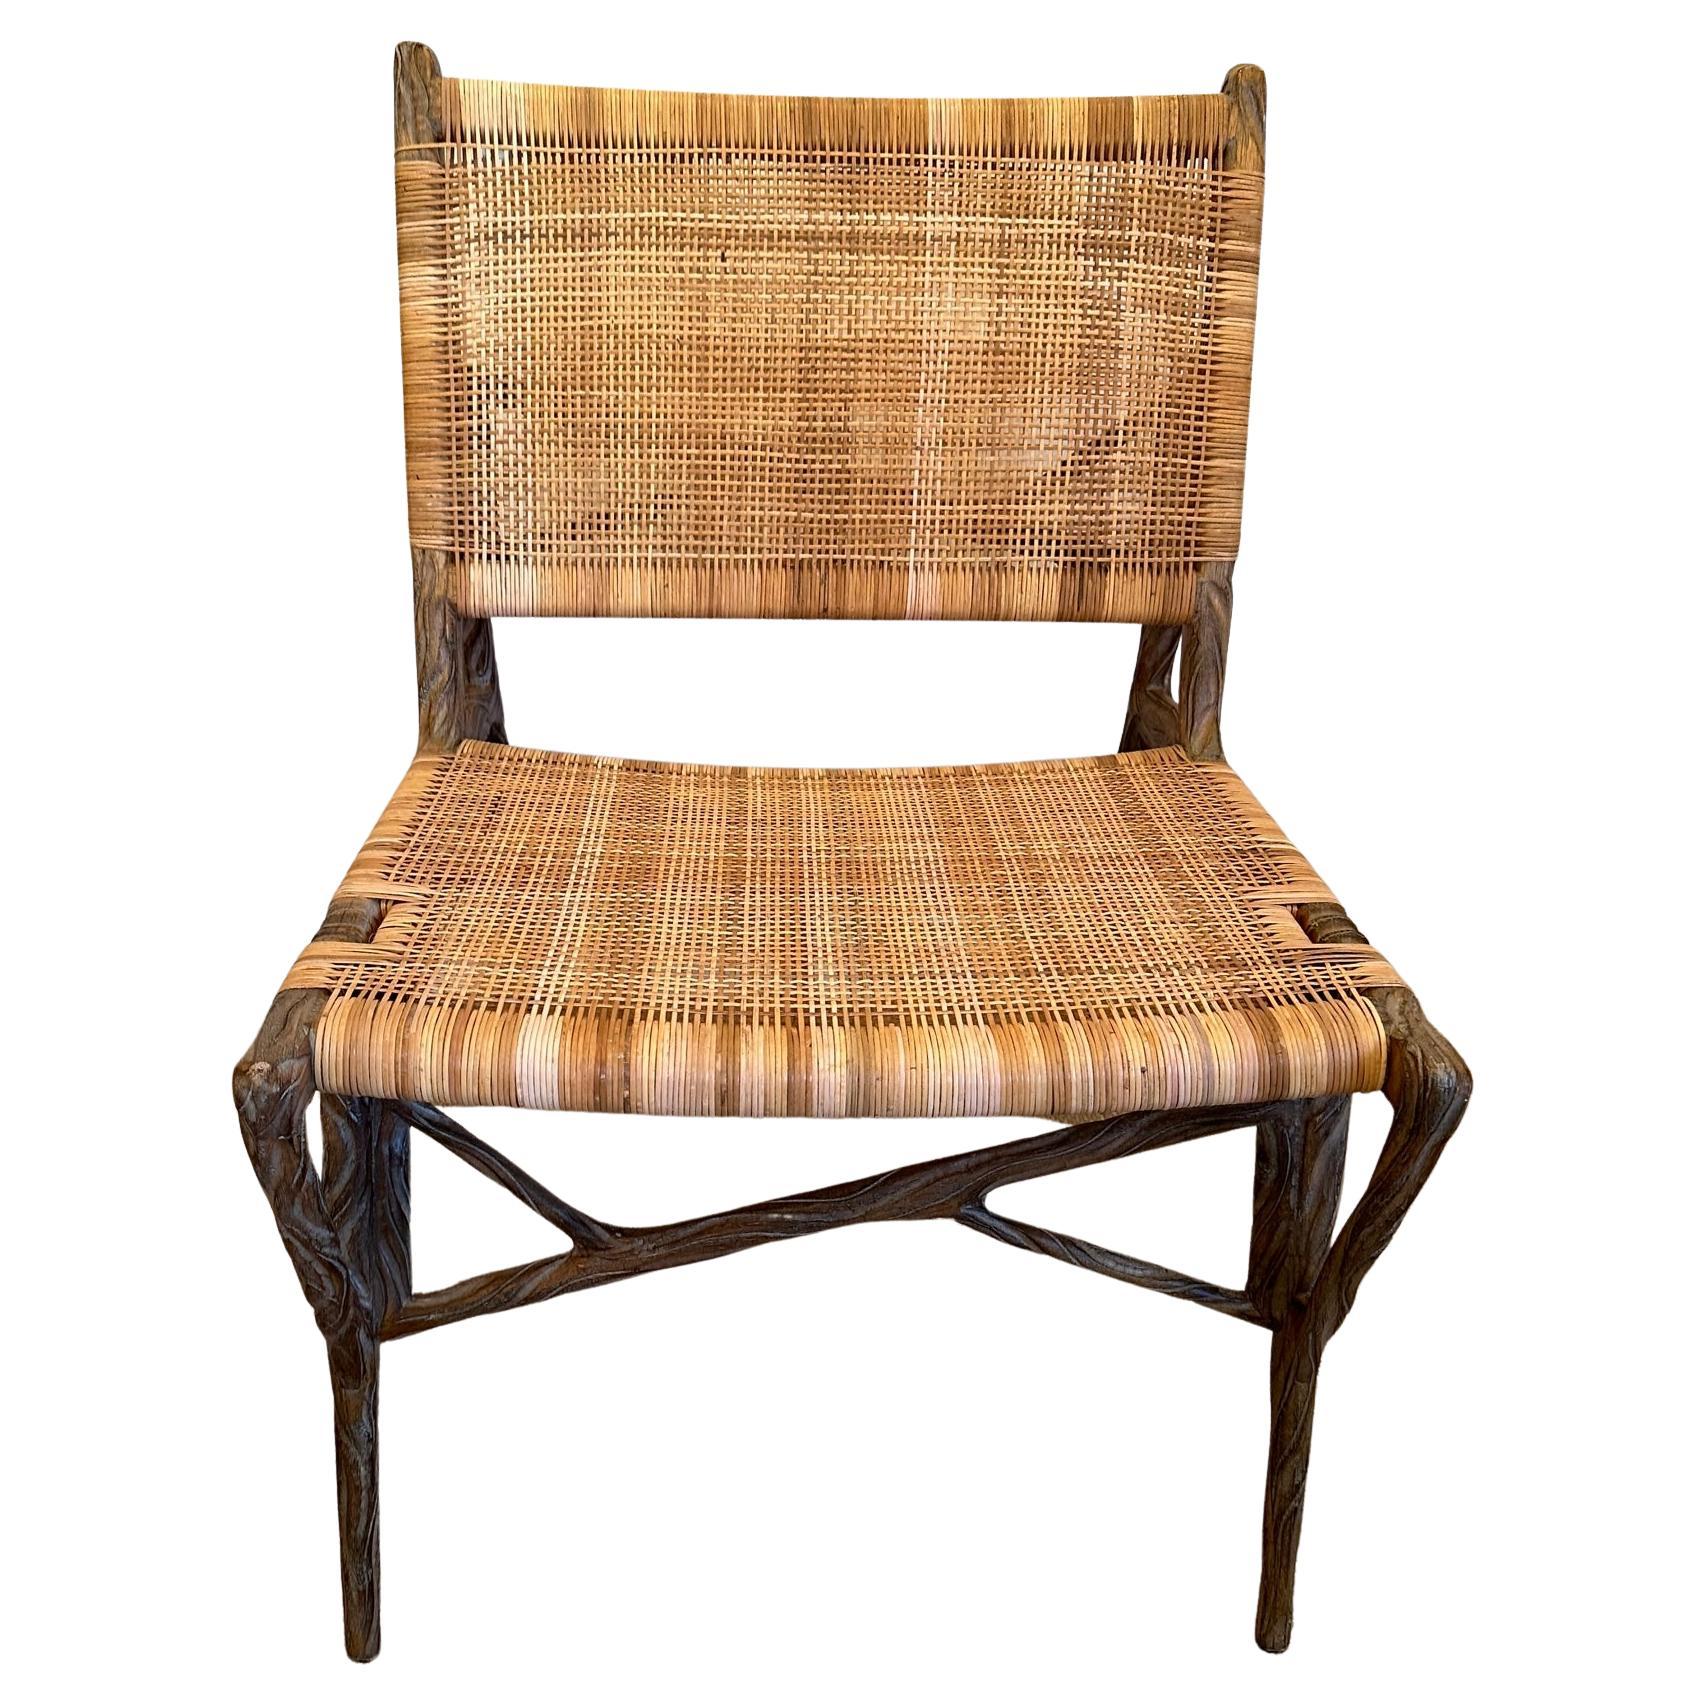 Superb Organic Modern Faux Twig and Woven Rattan Chair